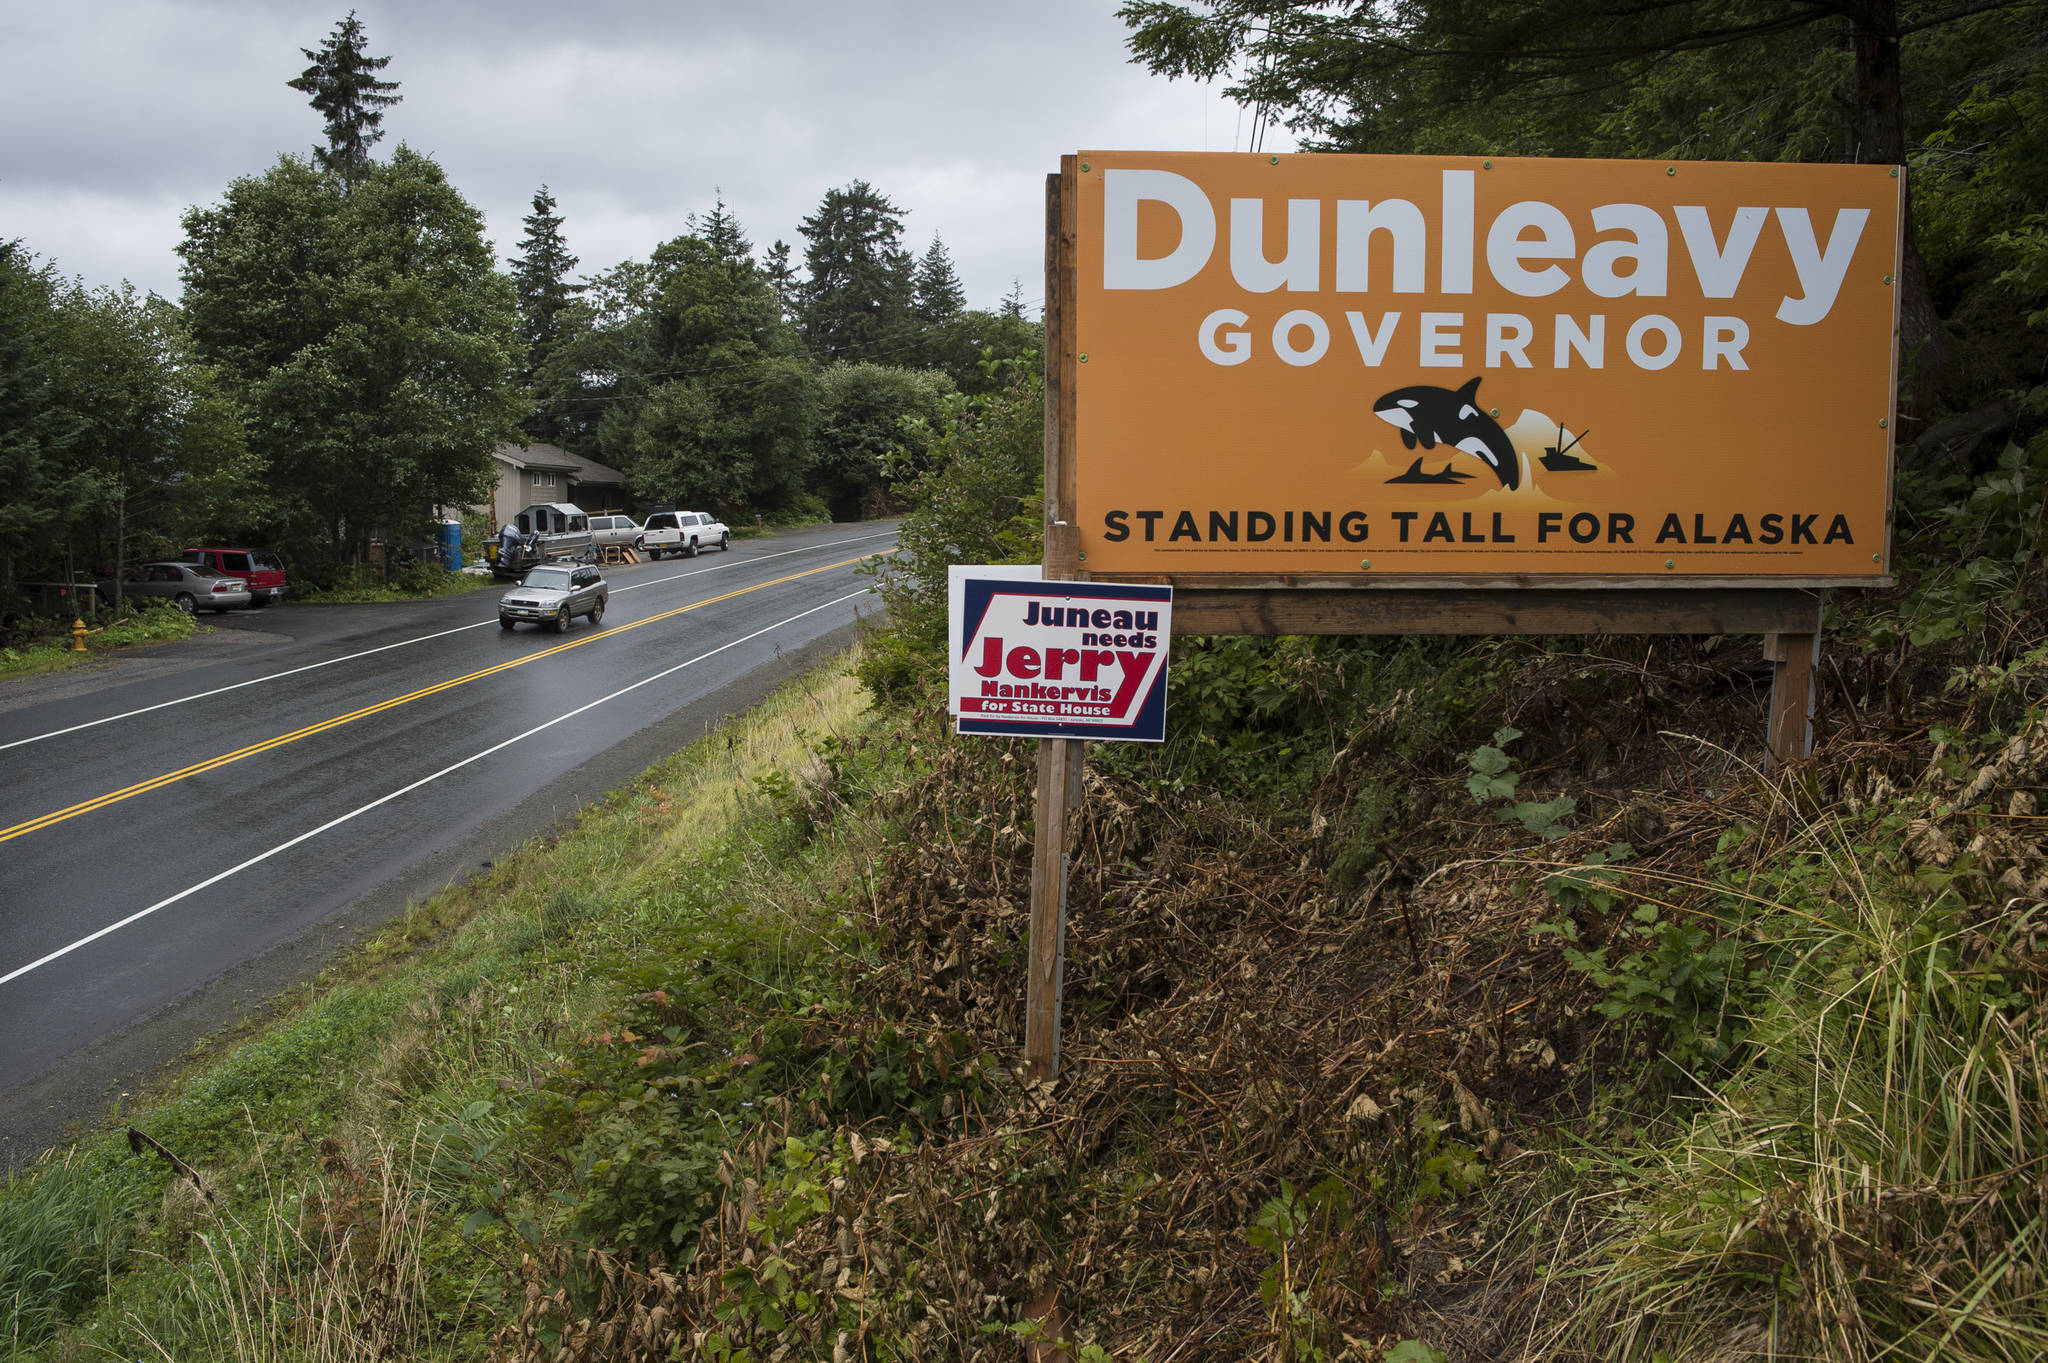 Mike Dunleavy for governor and Jerry Nankervis for state house election signs are seen on Egan Drive at 17 Mile on Friday, Aug. 24, 2018. Alaska statute states signs on private or commercial property cannot be located within 660 feet of a state-maintained road or “with the purpose of their message being read from the main traveled way.” (Michael Penn | Juneau Empire)